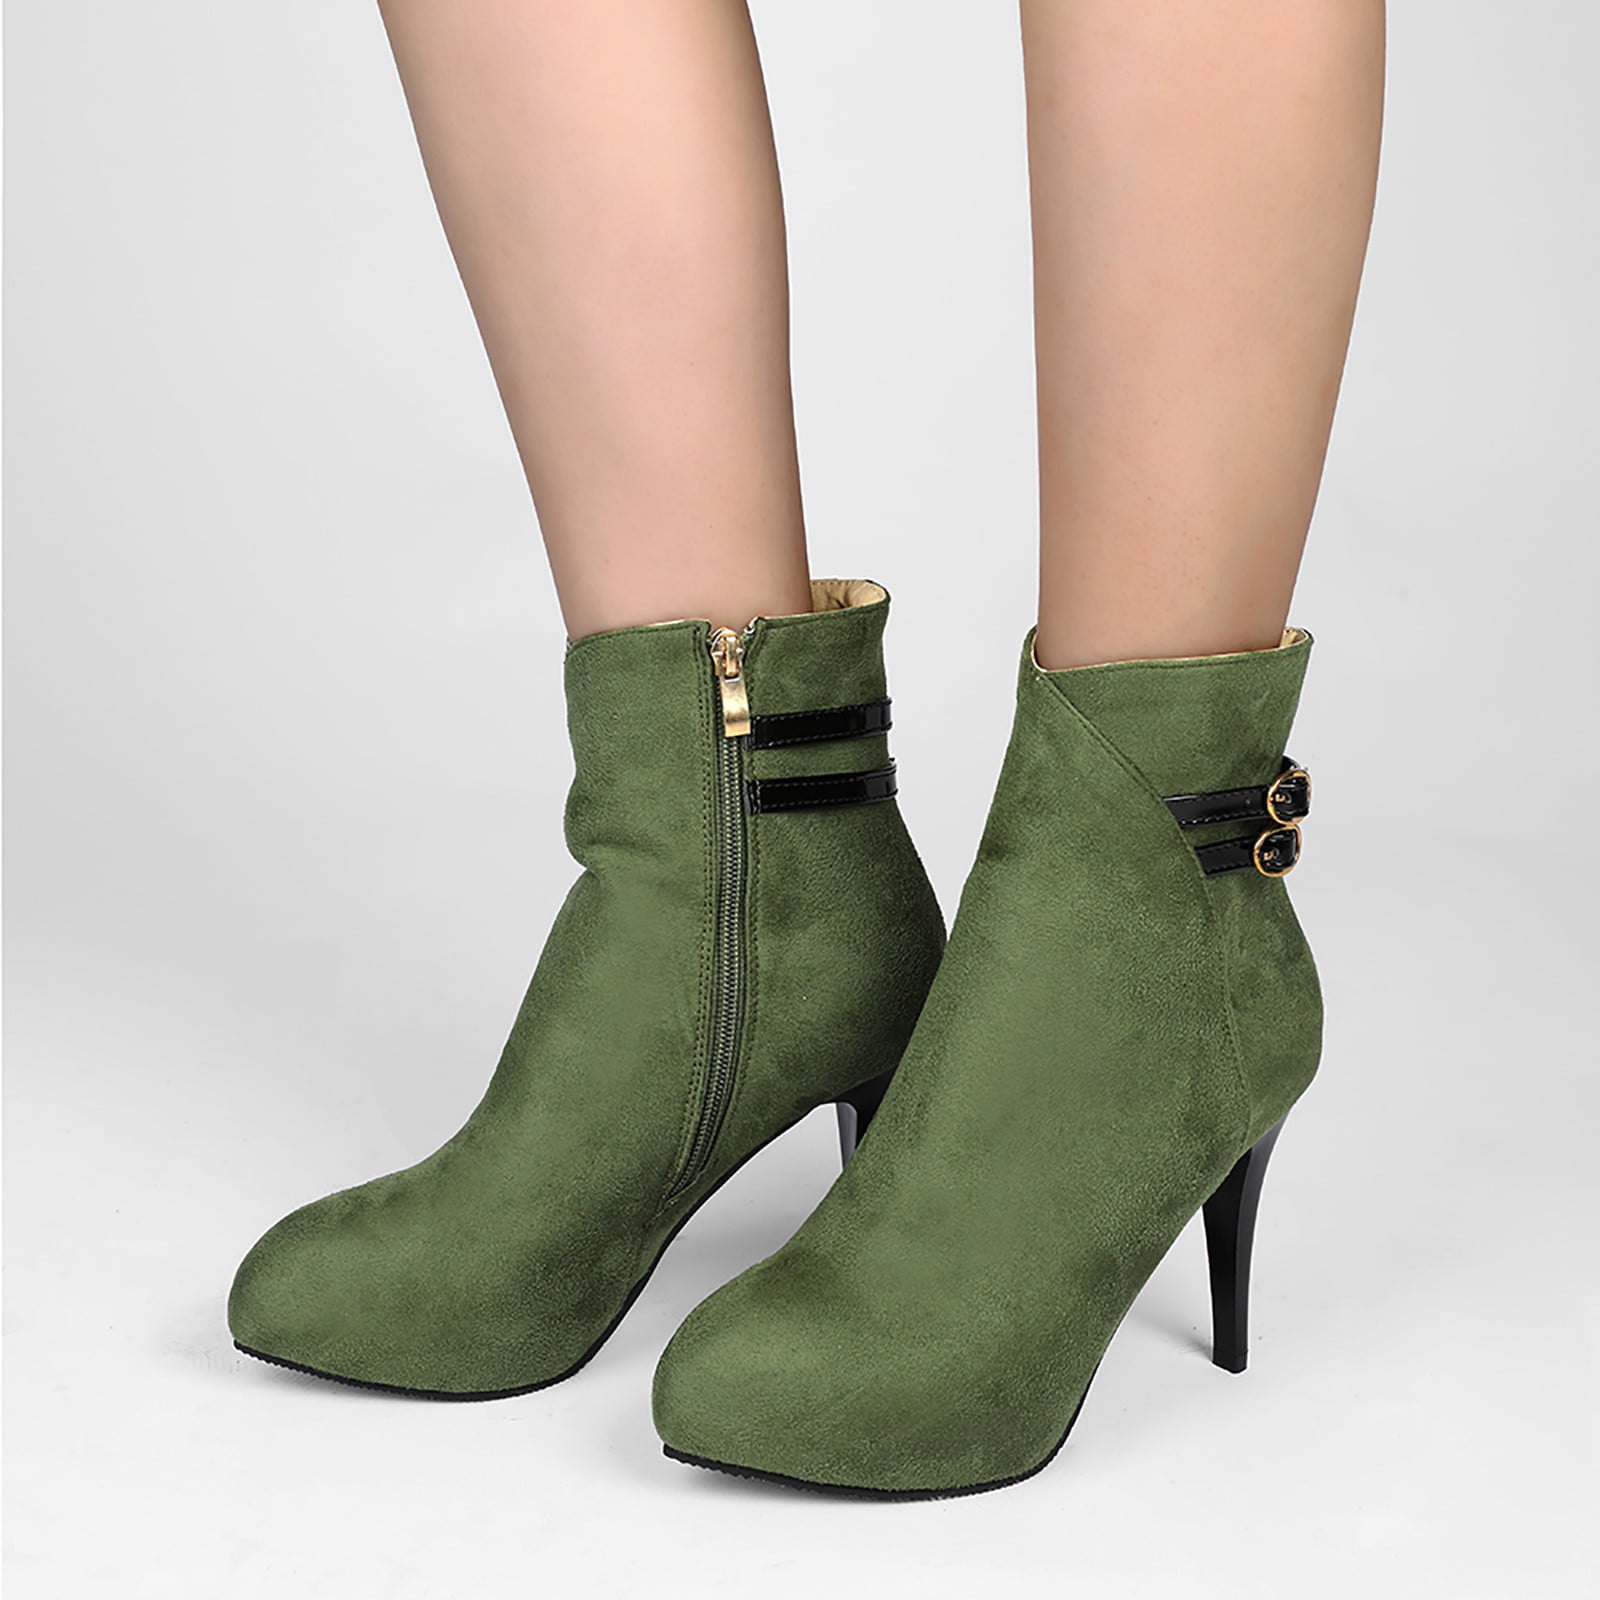 Green stiletto ankle boots made of genuine velour leather with a ruched  shaft - BRAVOMODA